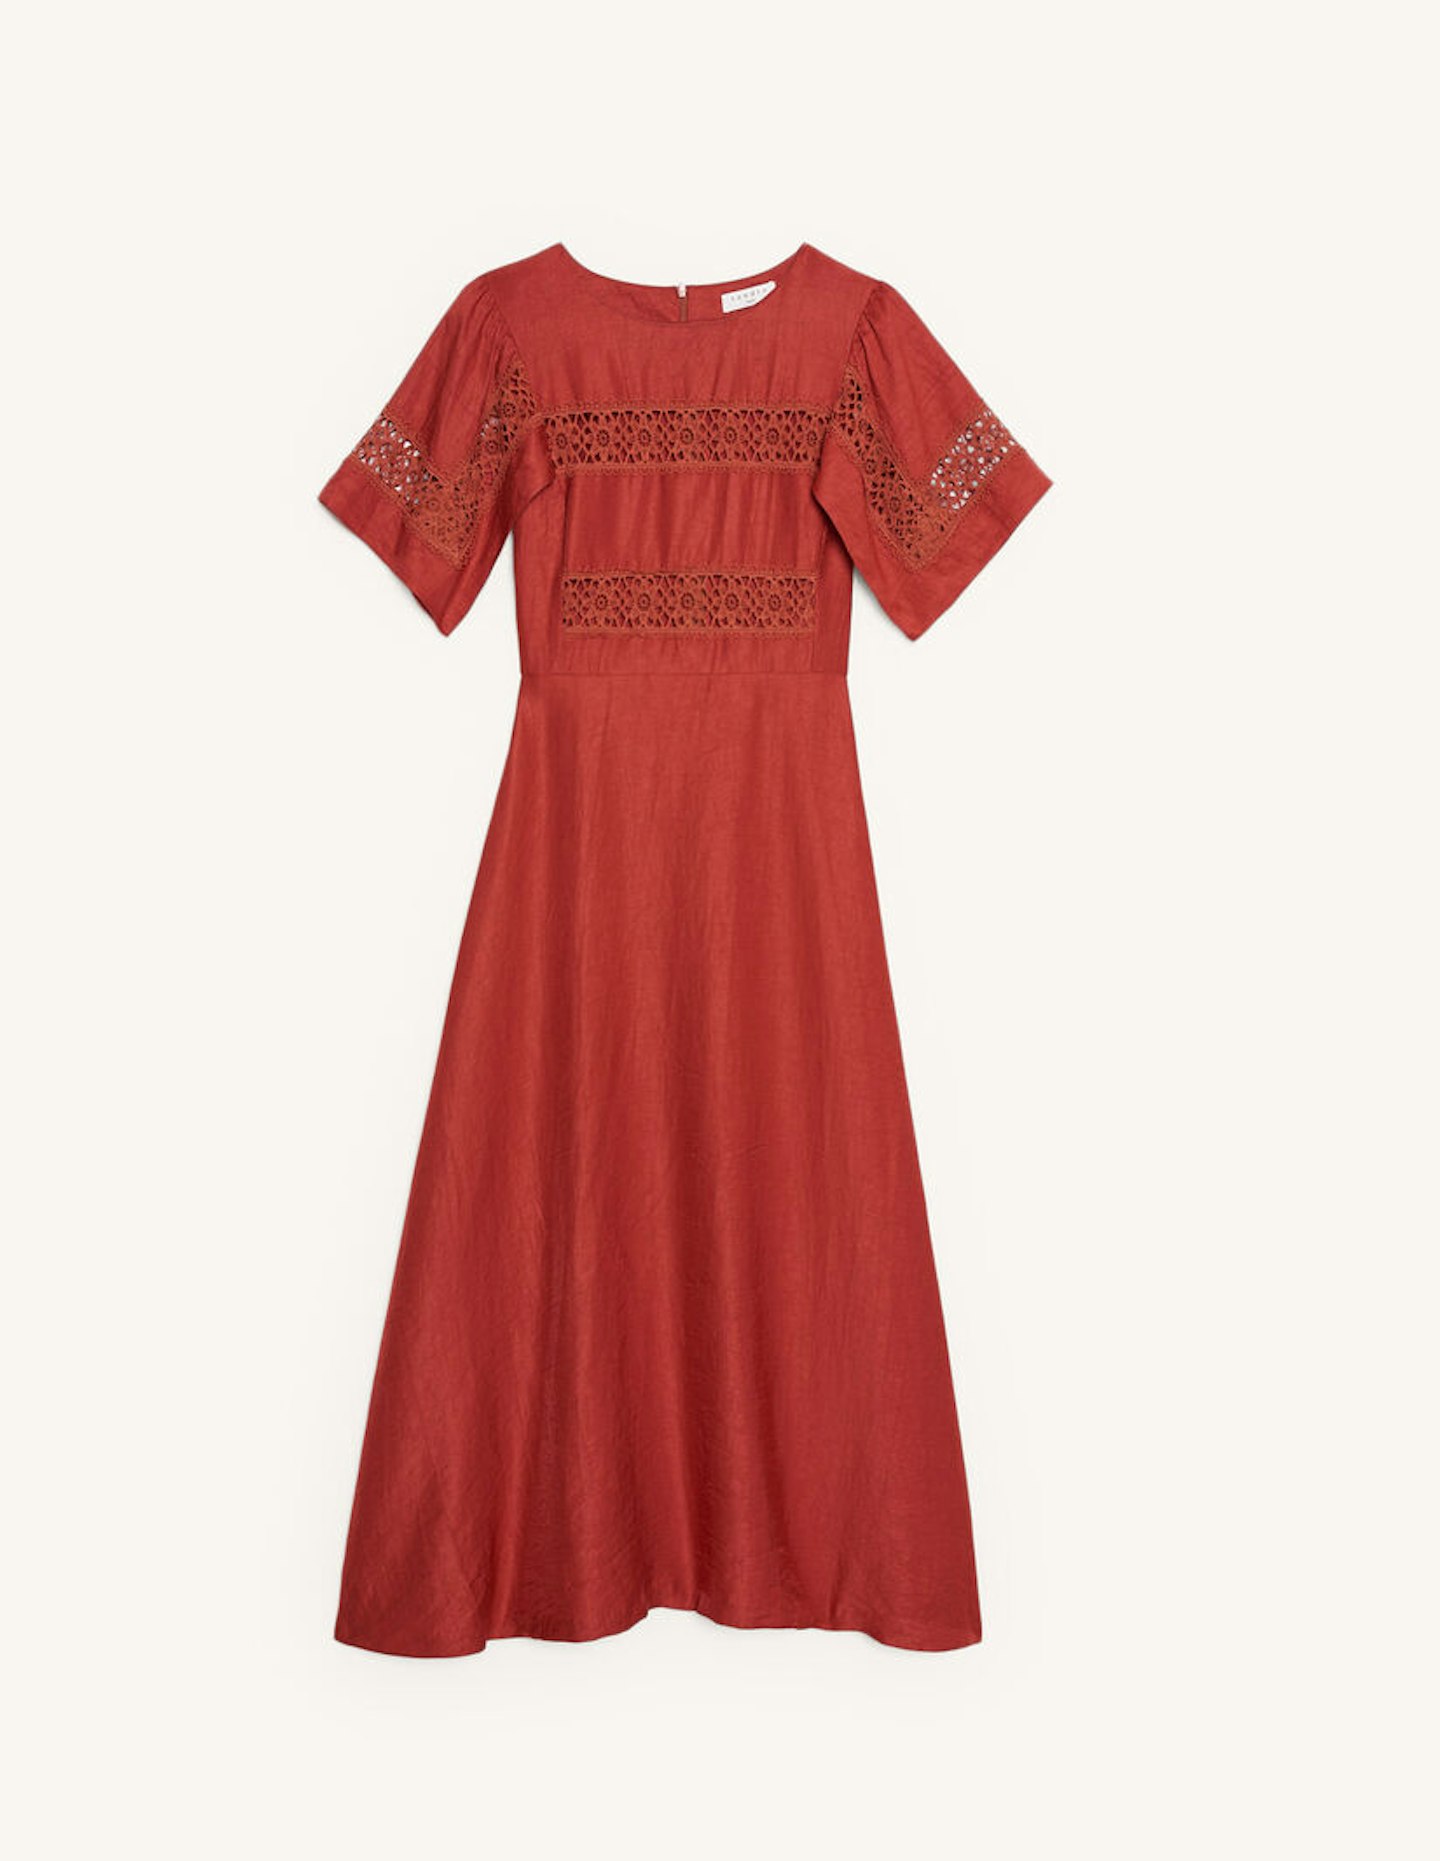 Sandro, Dress With Lace Embellishment, Was £260, Now £130